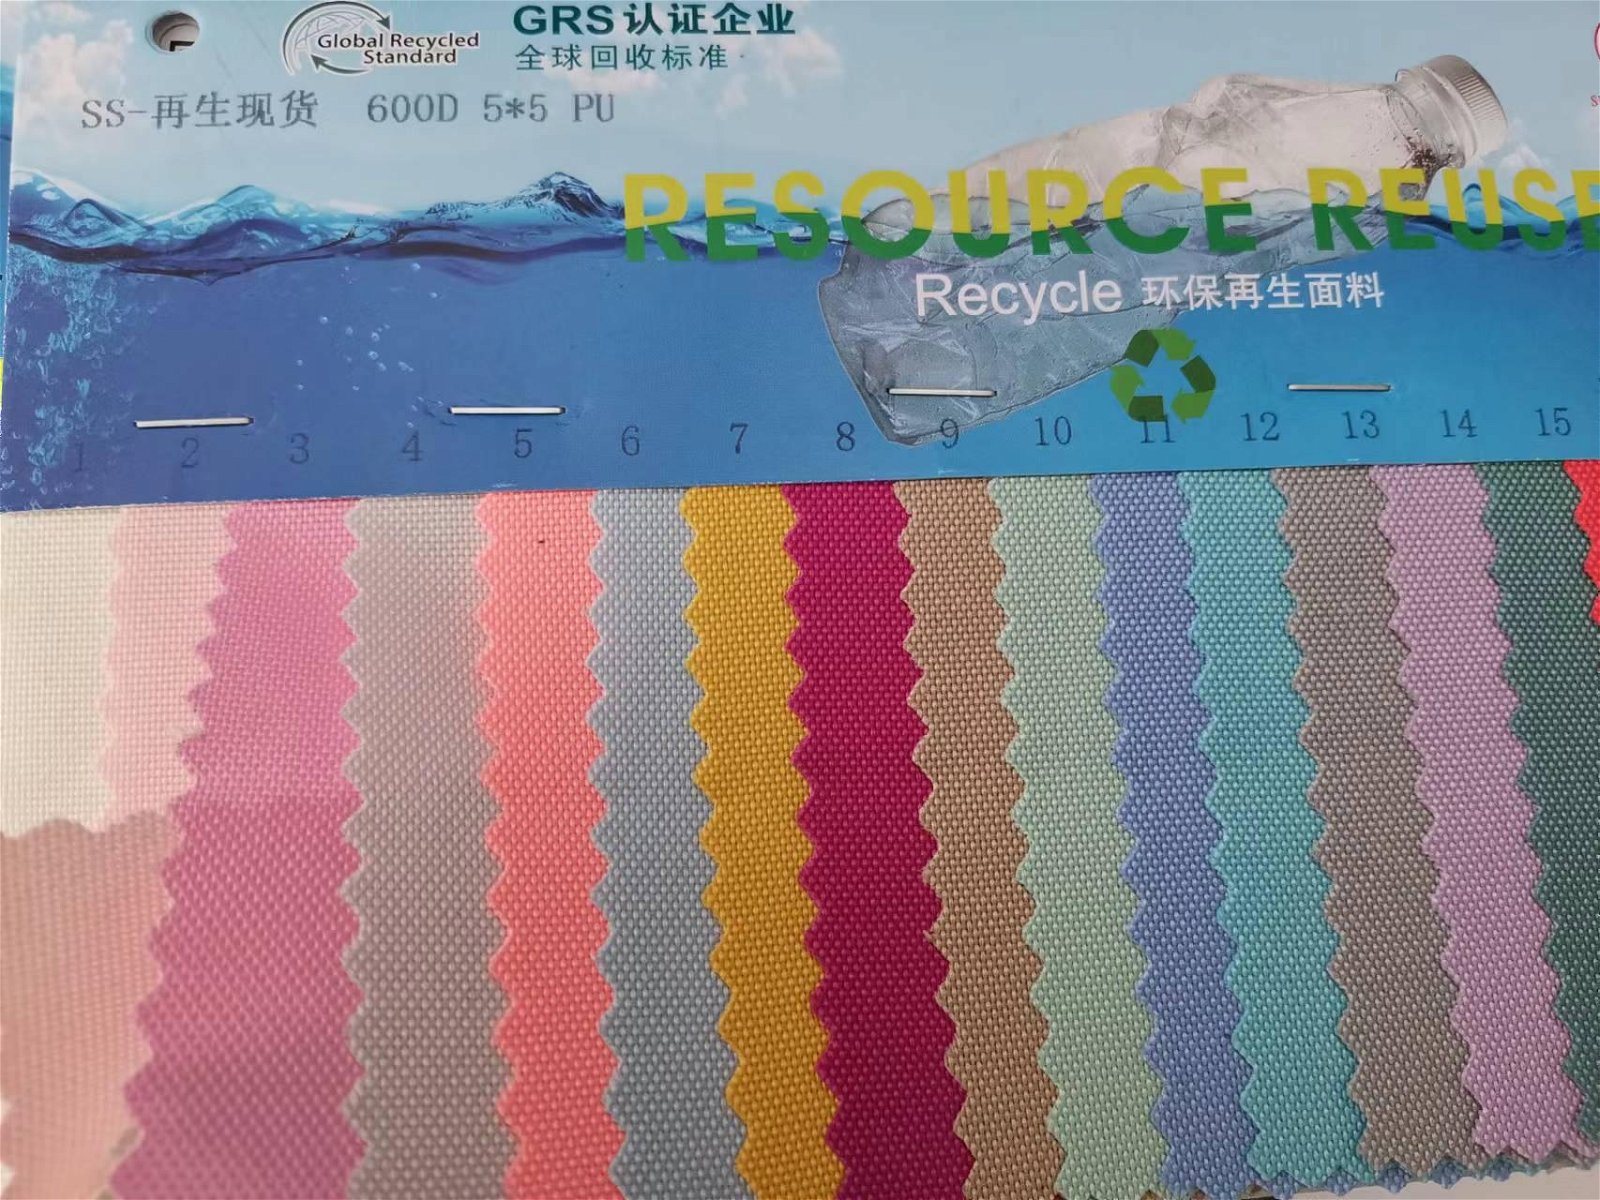 In Stock 600d Eco-friendly GRS recycled polyester 100% RPET 210D 300D 600D 900D  4